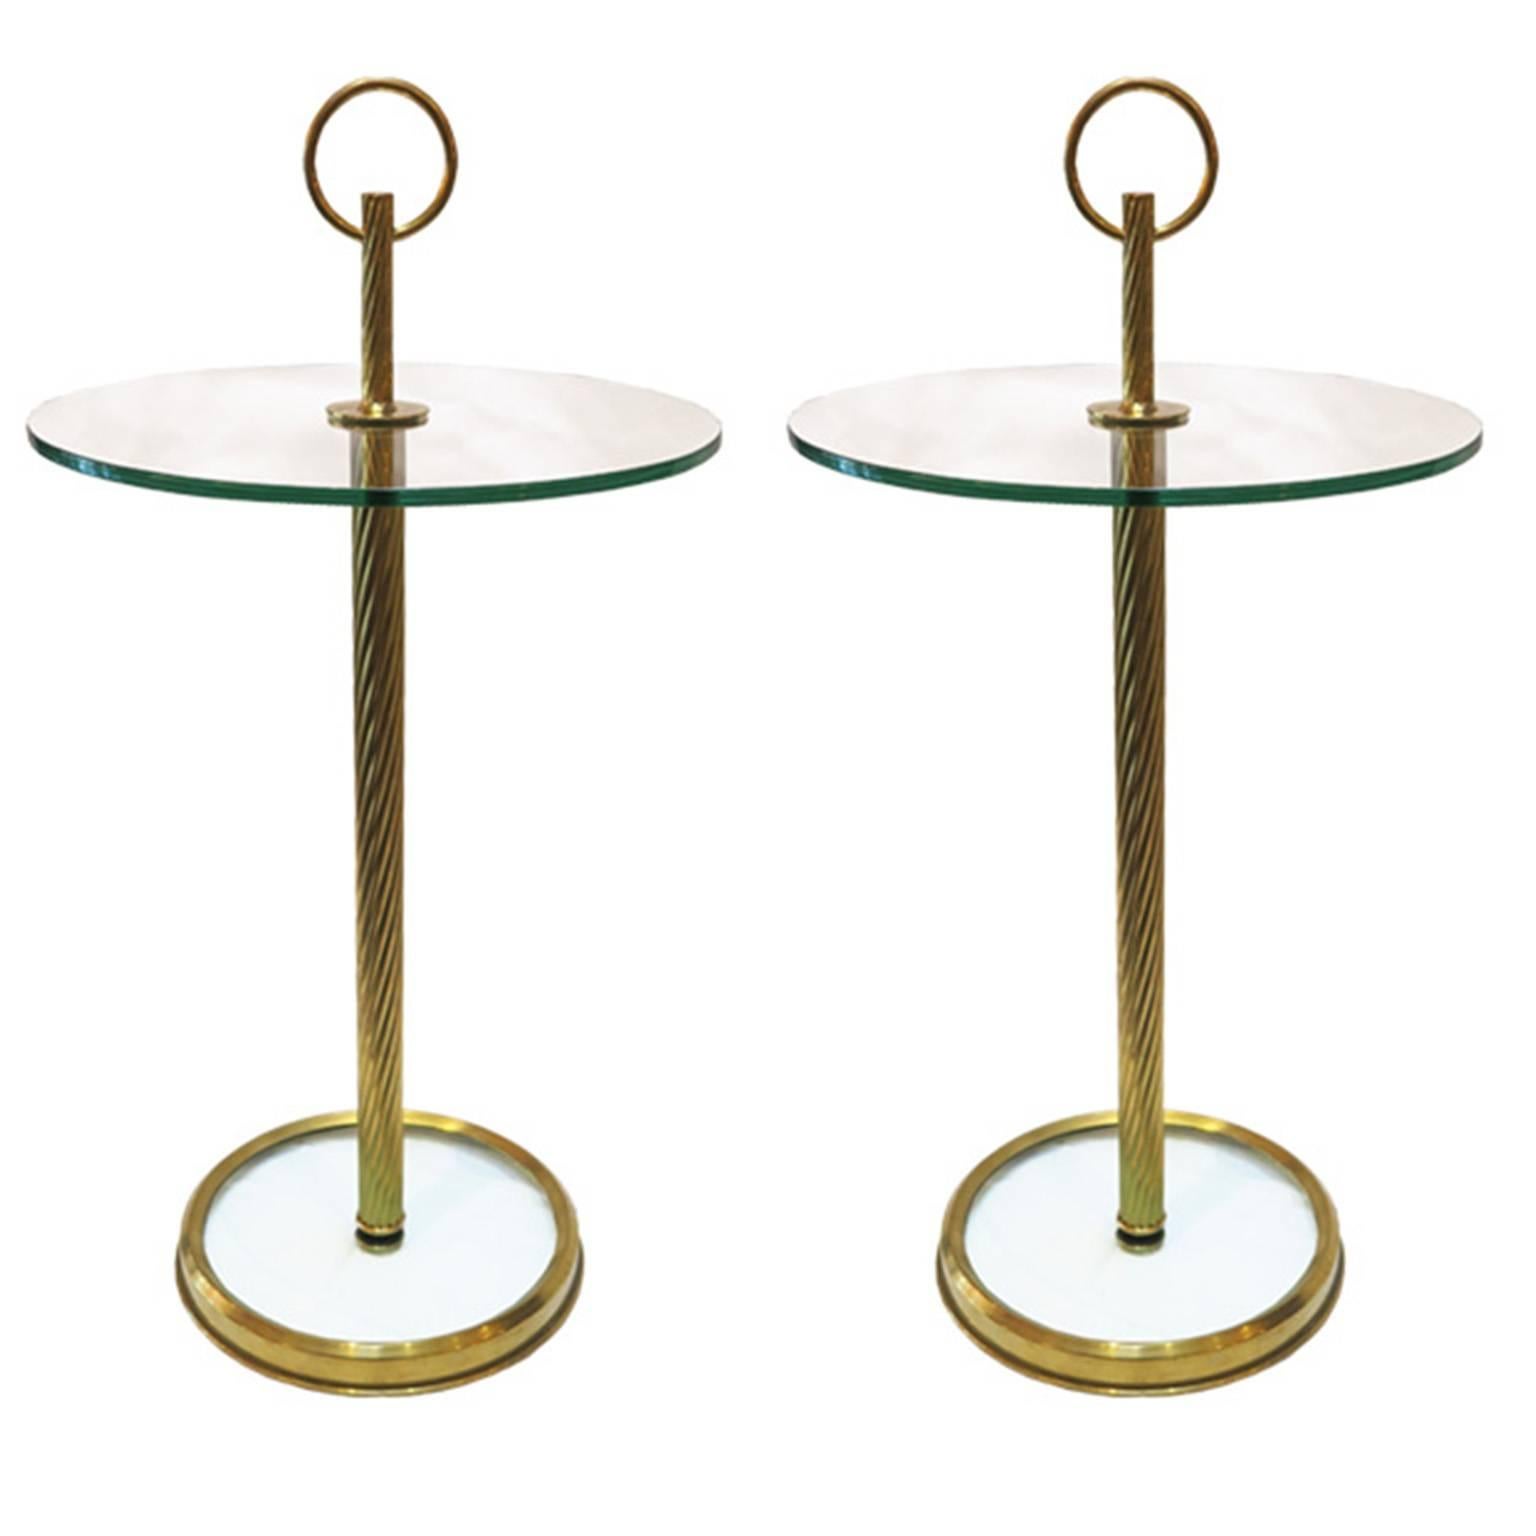 Pair of Side Tables, Design by Hermes